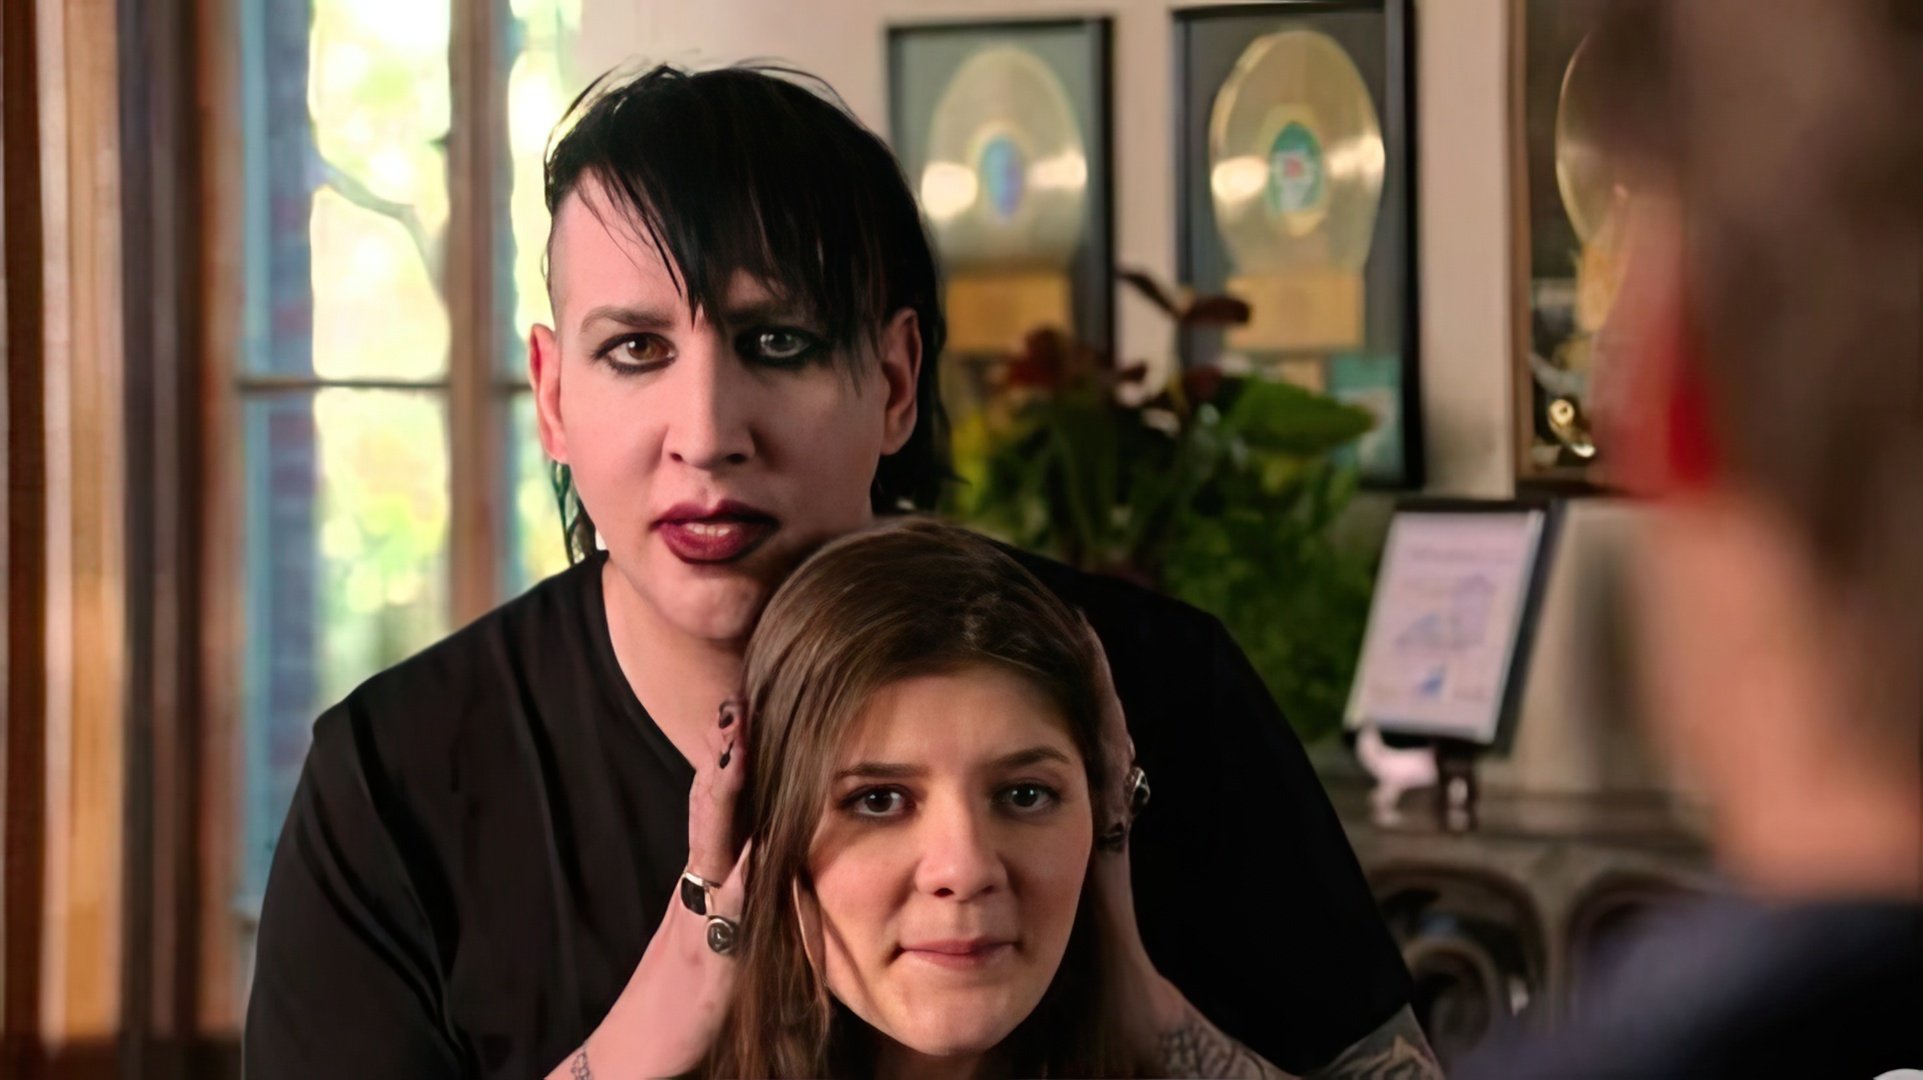 In Californication, Marilyn Manson played a cameo